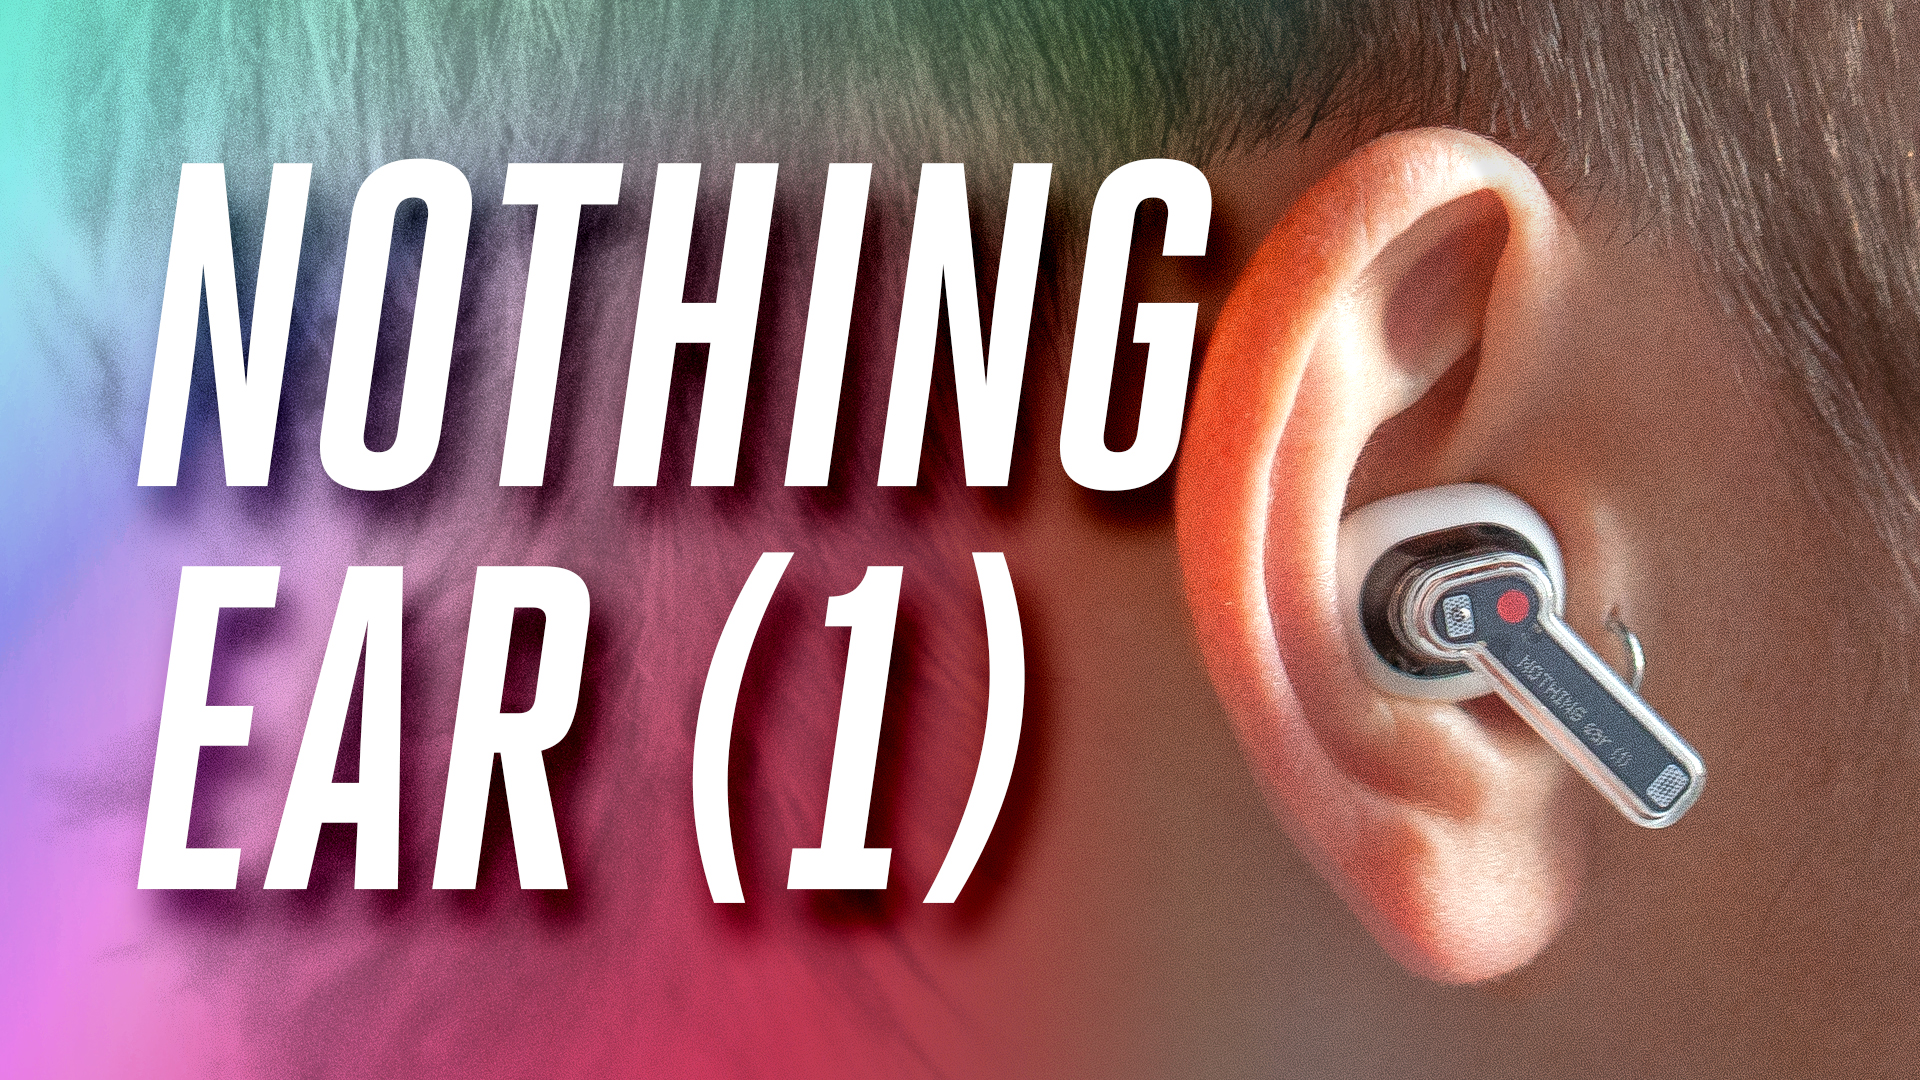 Here's Your First Look at the Nothing ear (1) Transparent Charging